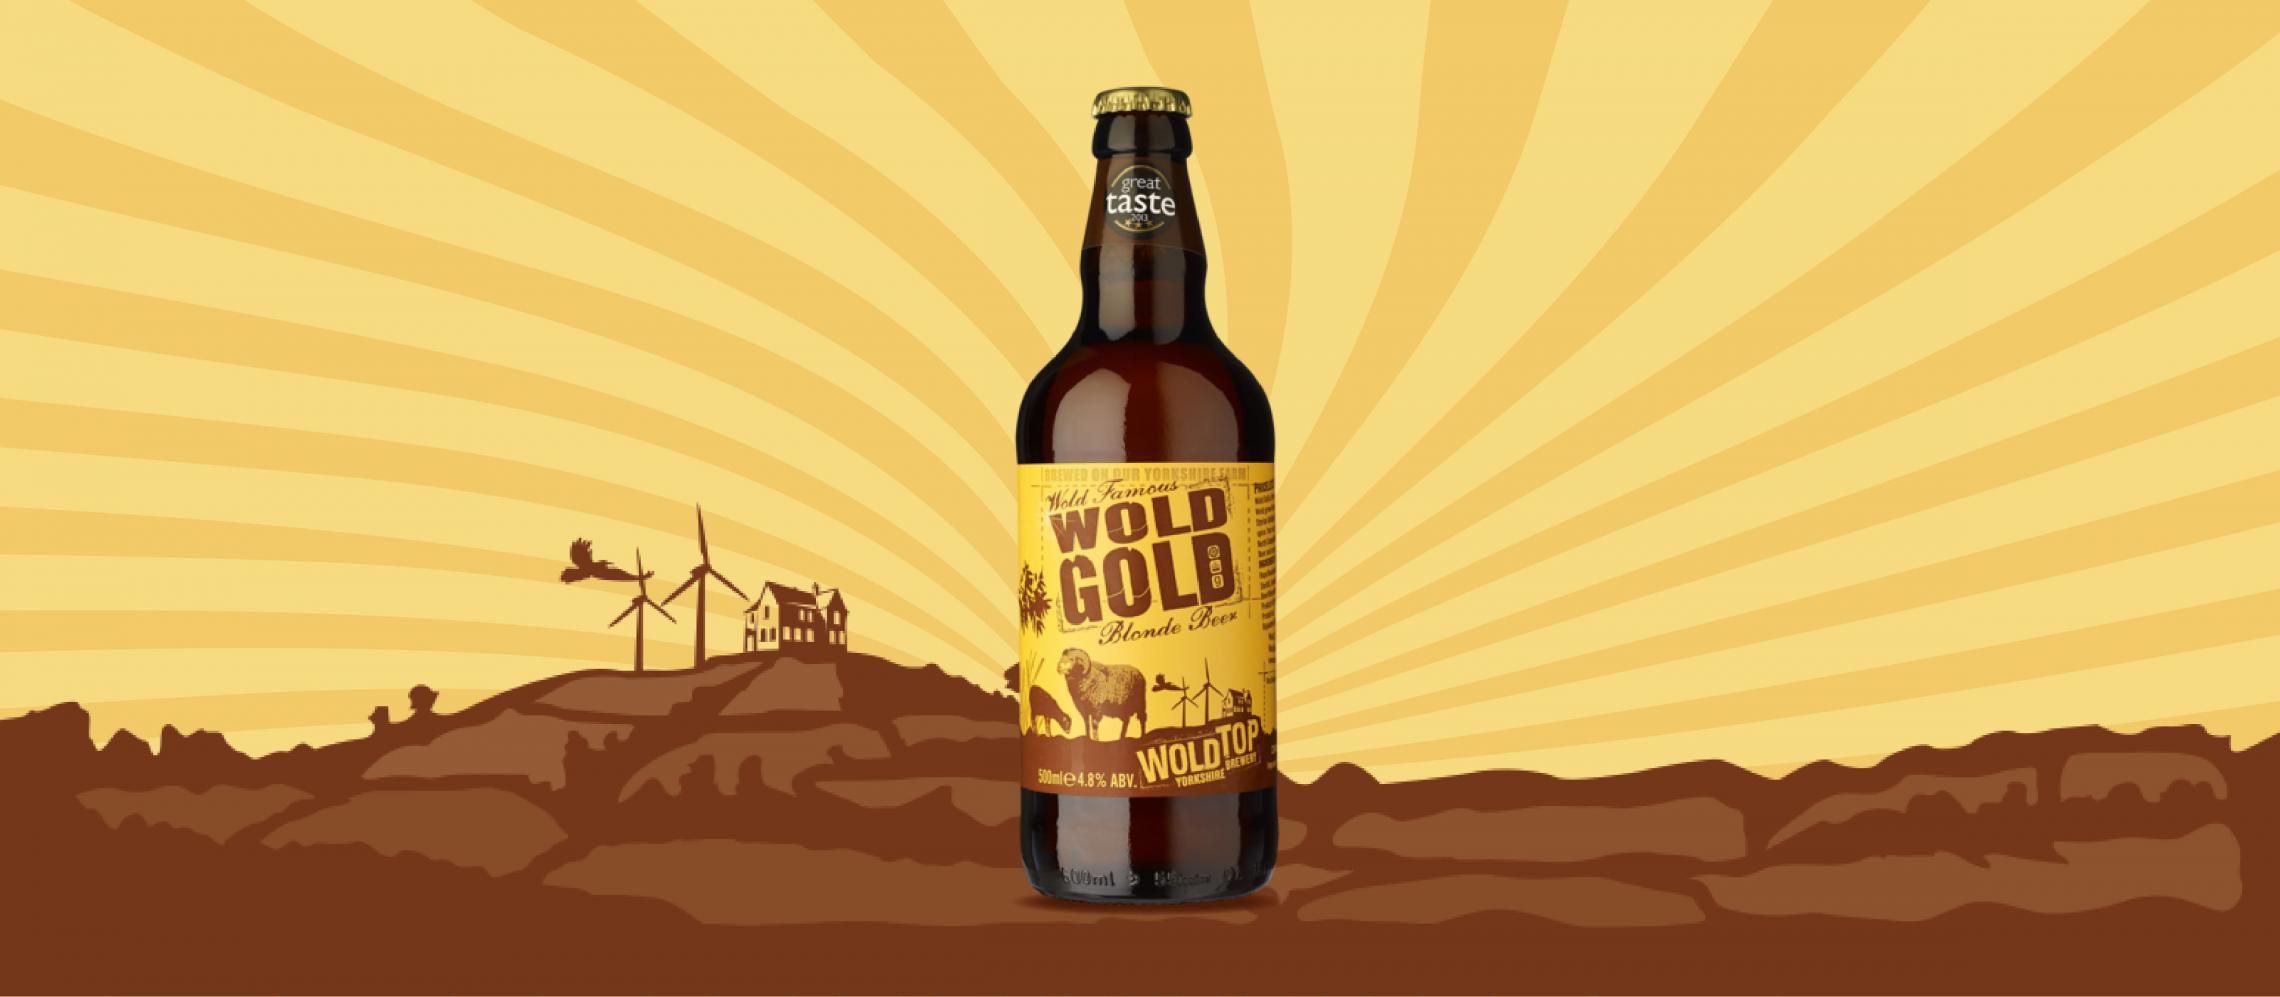 Photo for: Wold Top Brewery awarded at a reputed Beer Competition